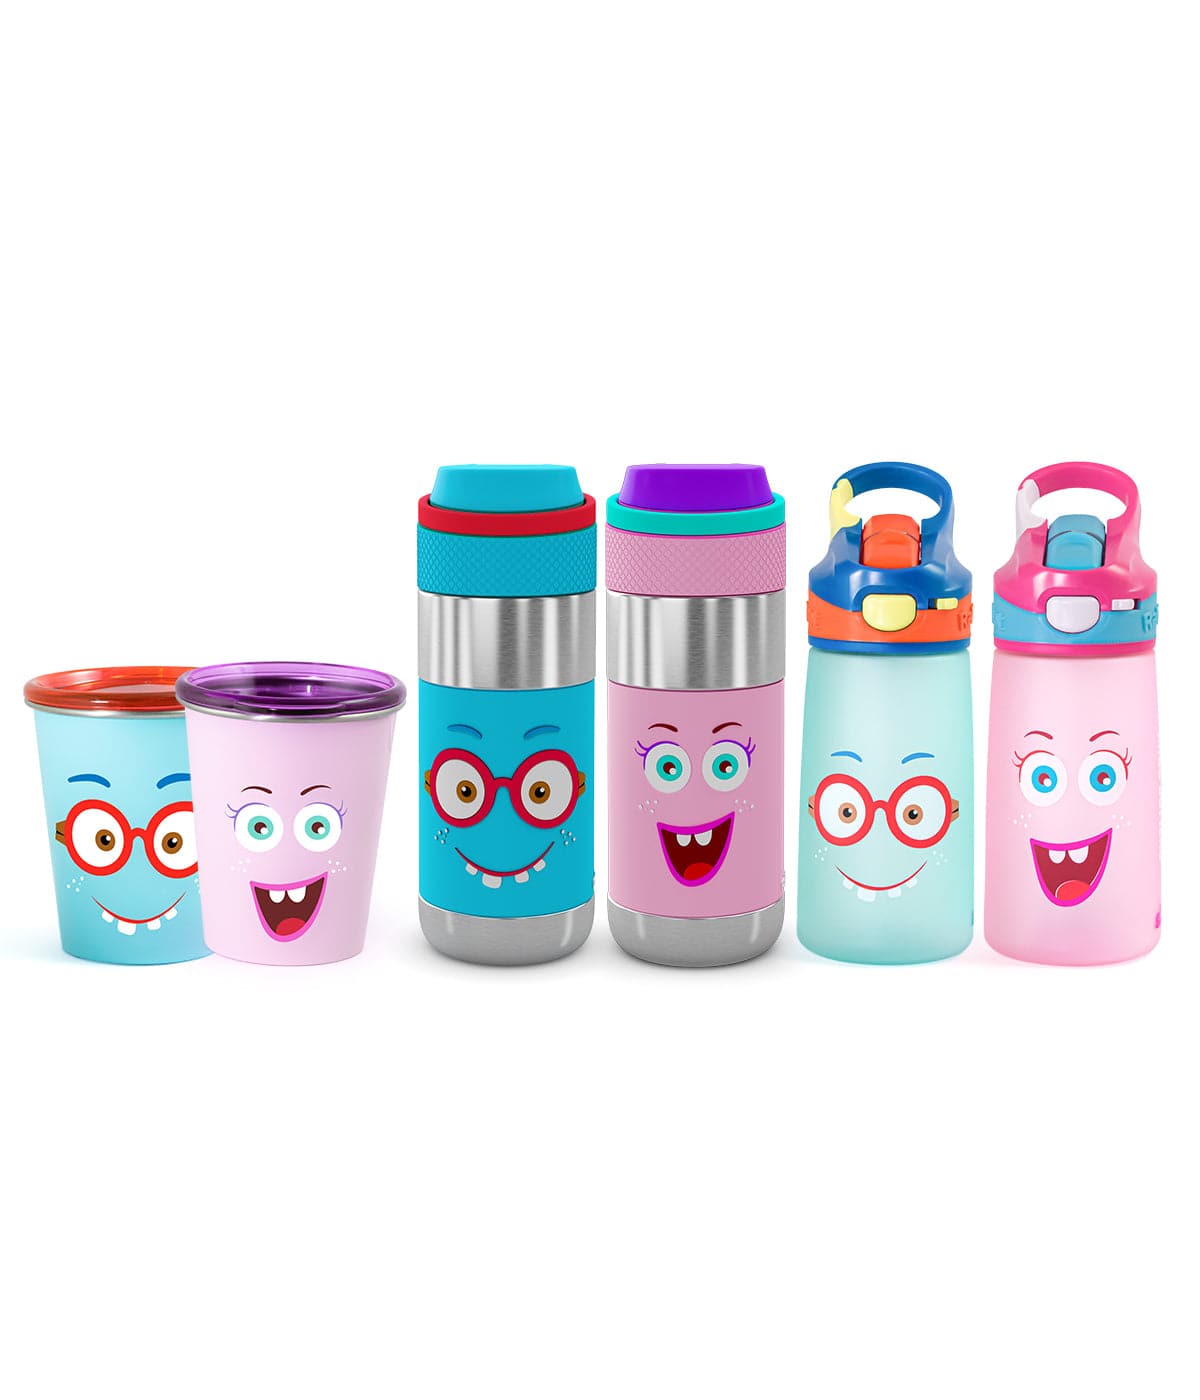 Less is bore combo (2 Clean Lock Insulated Stainless Steel Bottles + 2 Snap Lock Sipper Bottles + 2 Better Cups with Training Lid)